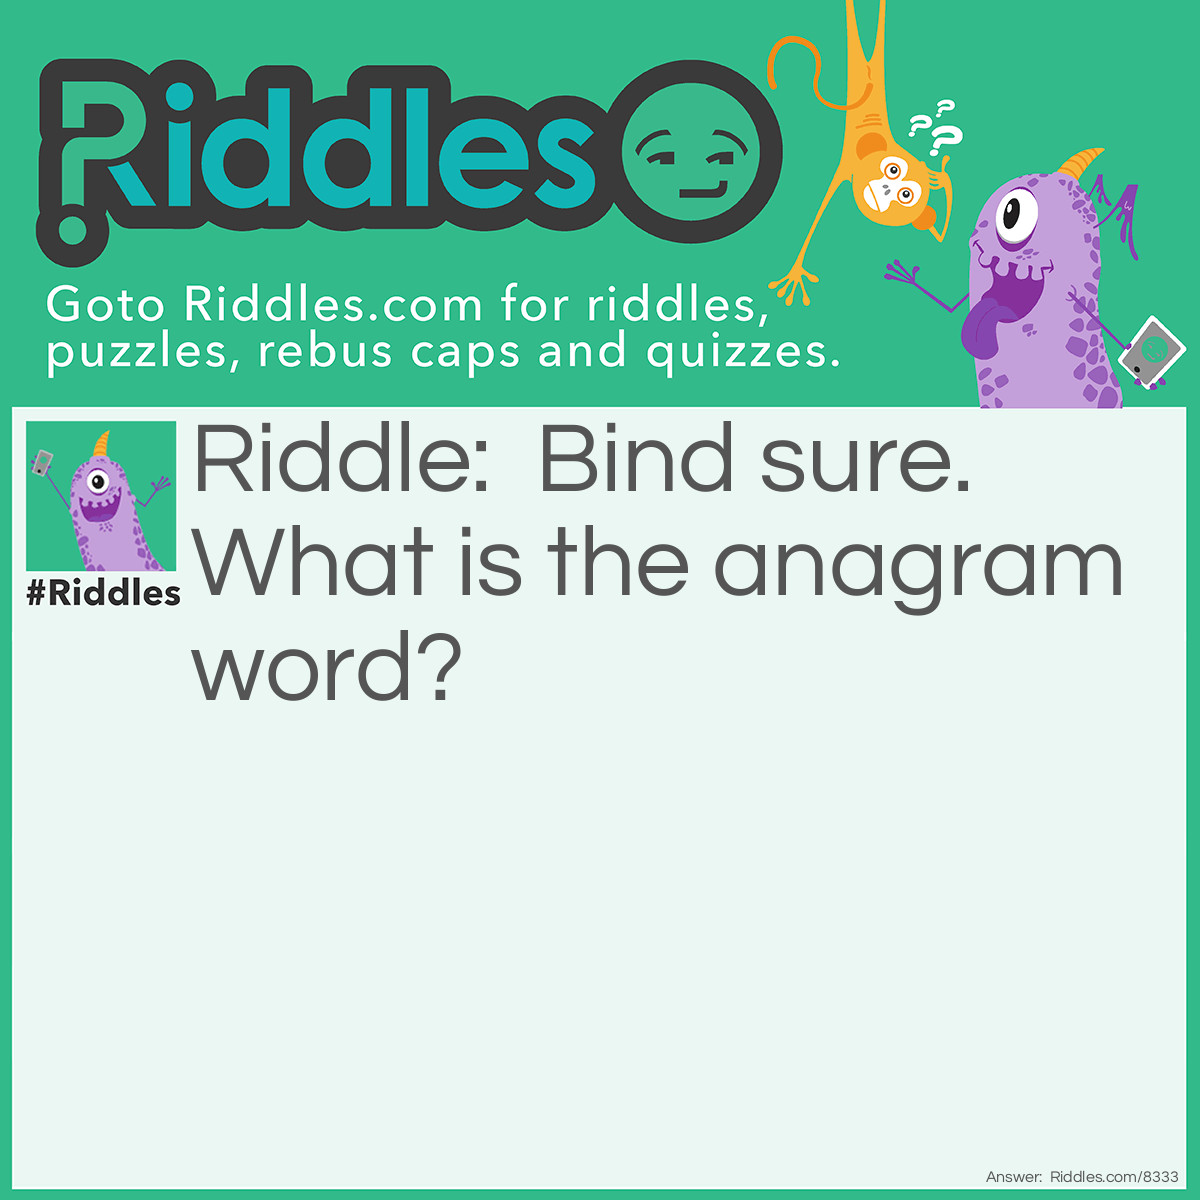 Riddle: Bind sure. What is the anagrammed word? Answer: Burnside.